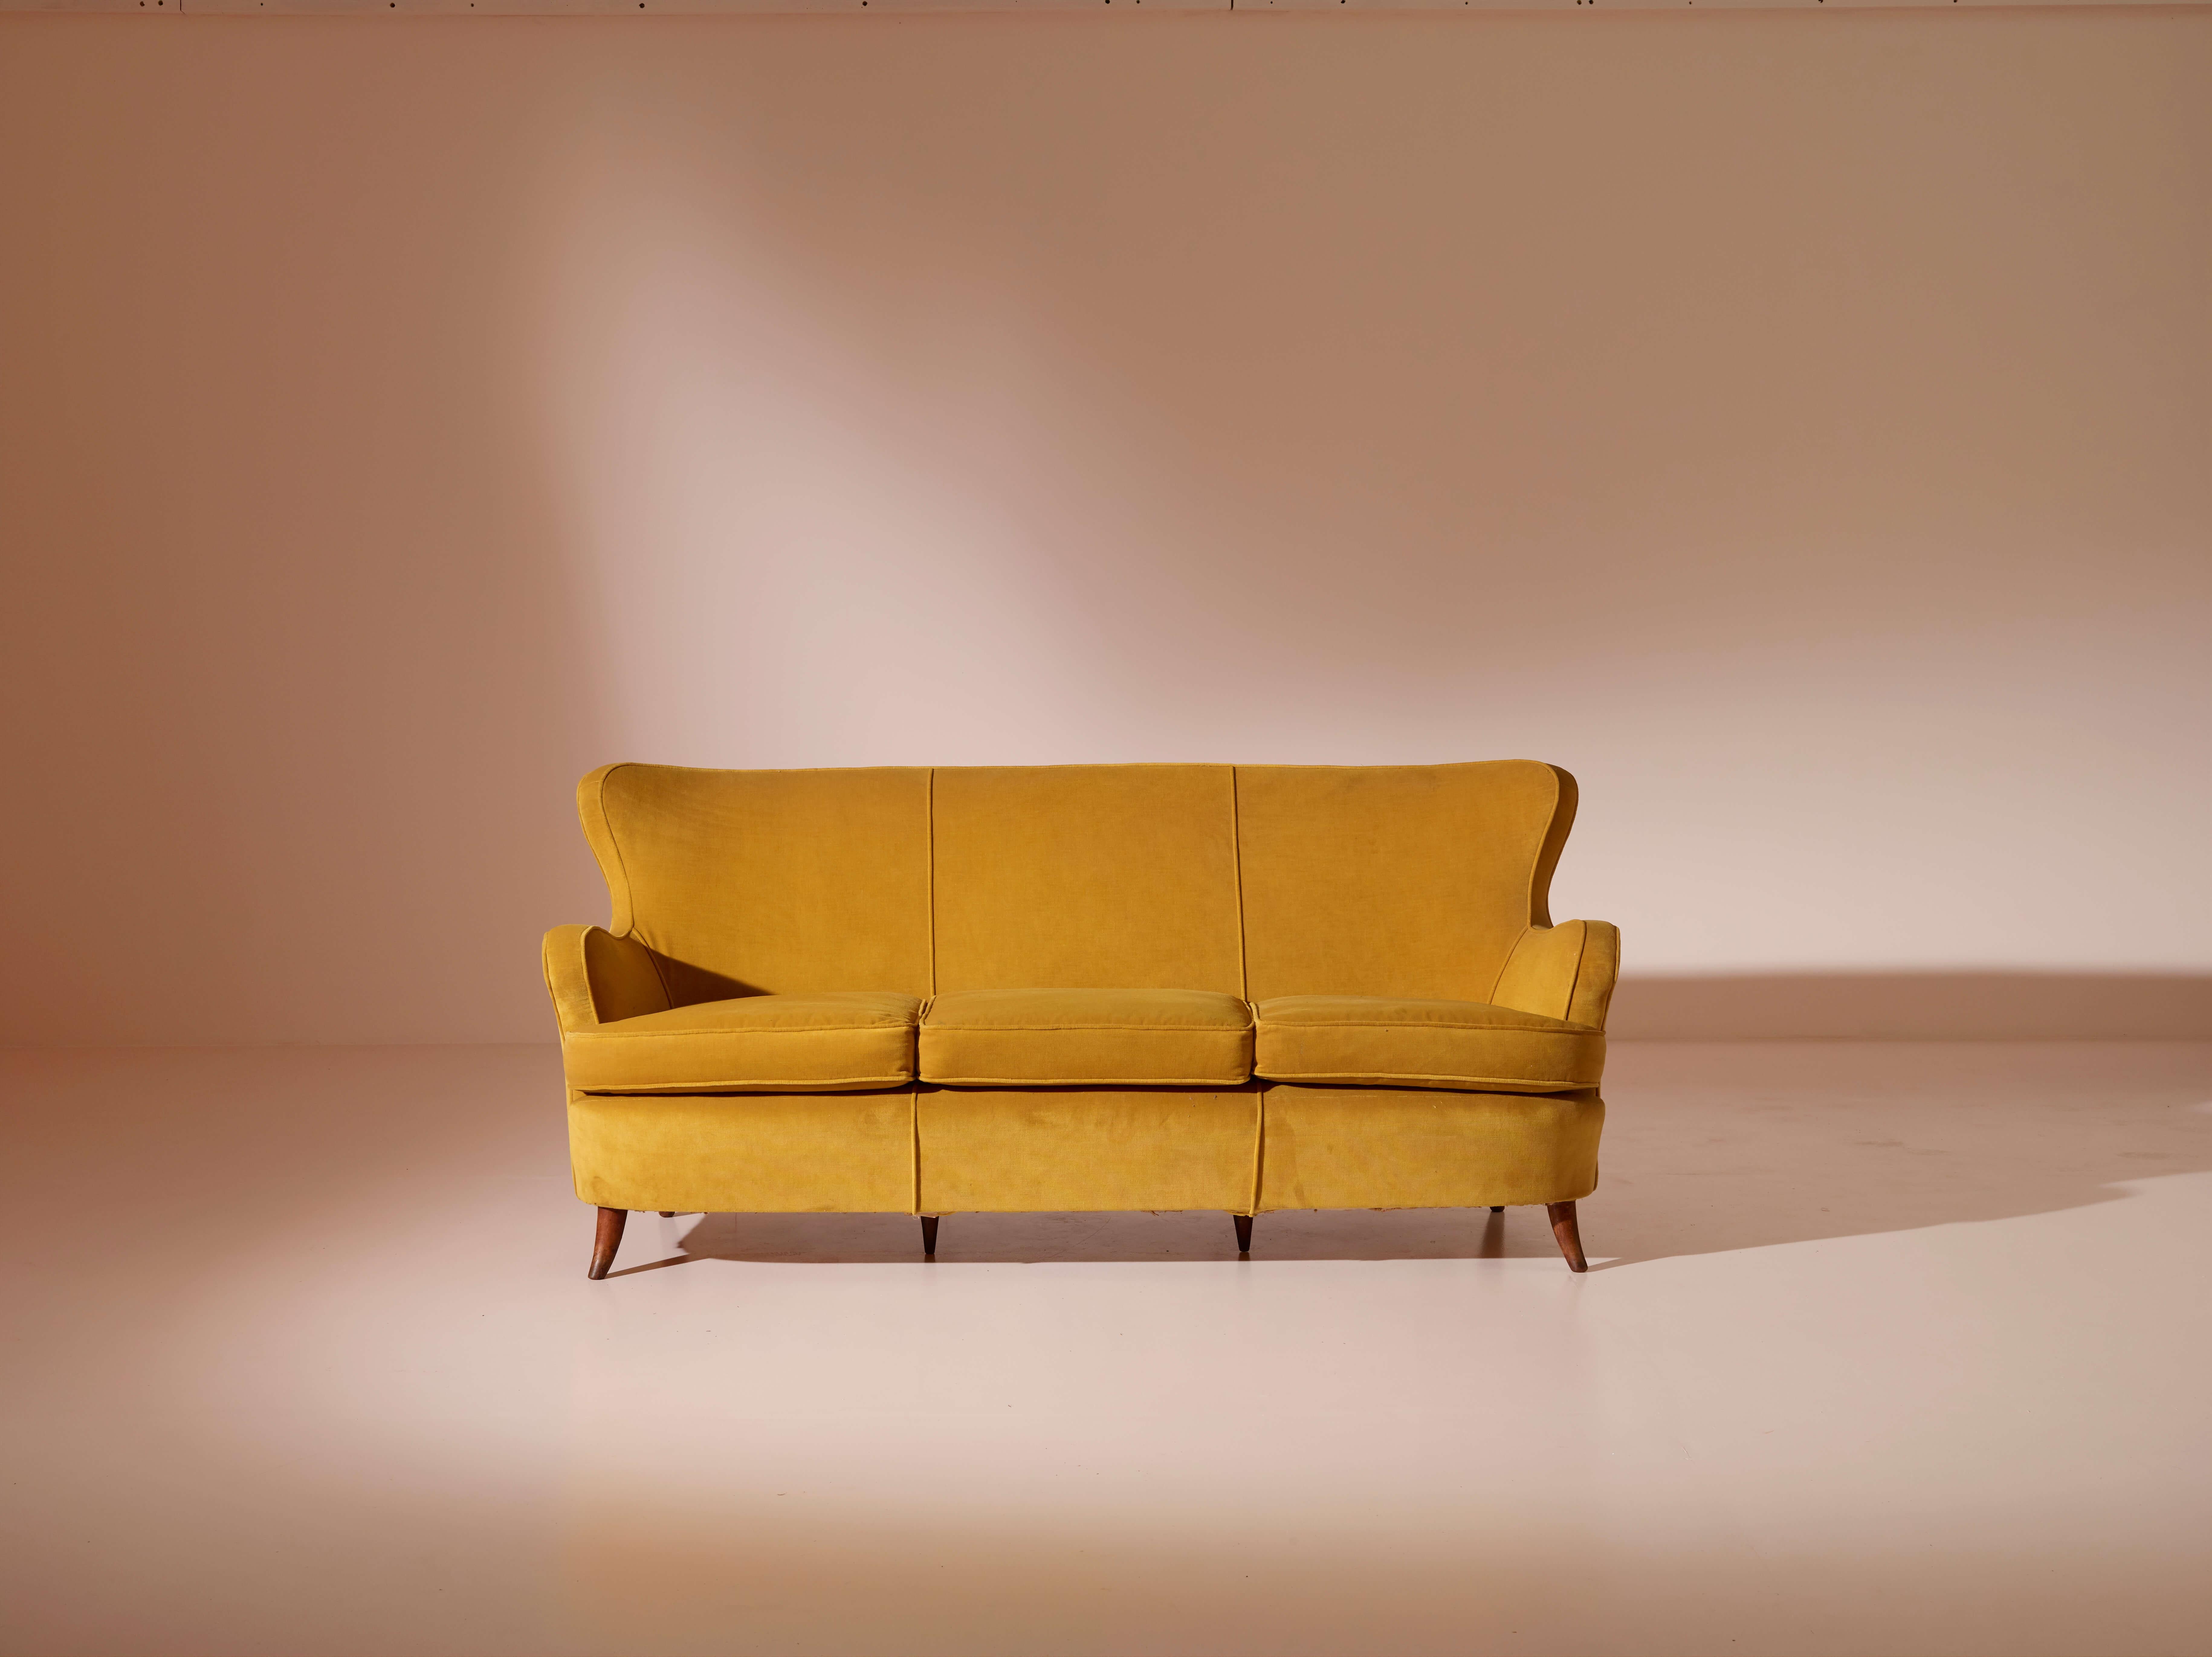 Originating from Italy in the 1940s, the aesthetically refined sofa designed by renowned Italian designer Osvaldo Borsani epitomizes the enduring charm of mid-century Italian furniture.

Distinguishing features of the sofa include its organic